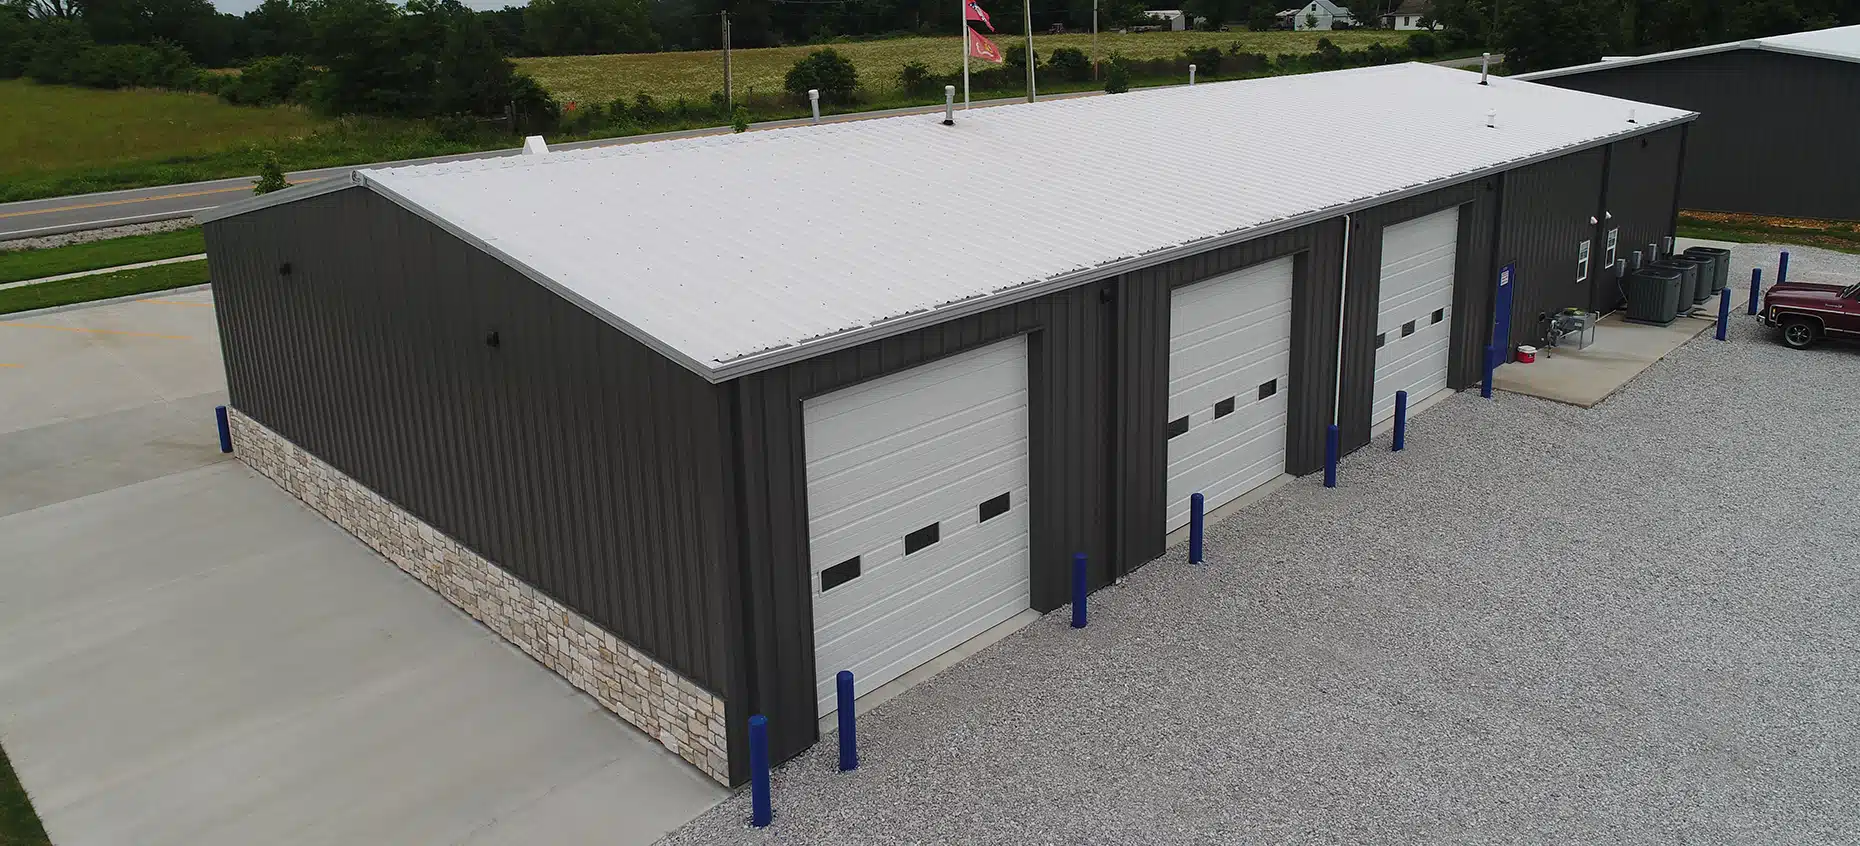 Custom Metal Building using Commercial Metal Panels with Galvanized Roof and Charcoal Walls